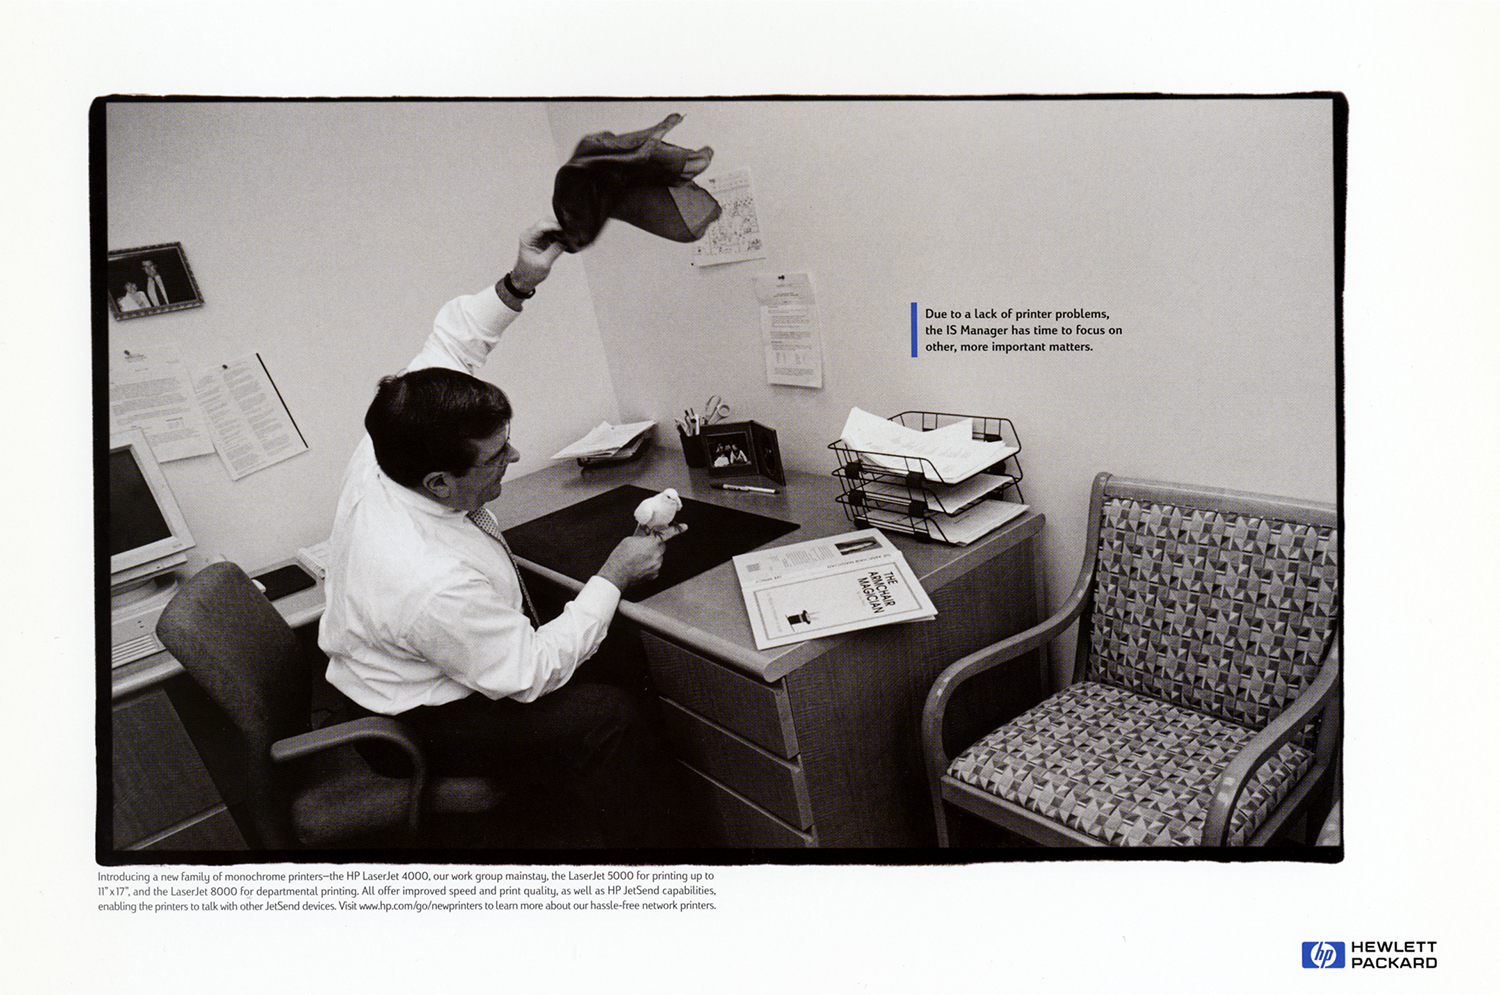   HP LaserJet Campaign  Goodby, Silverstein &amp; Partners, San Francisco 1998 